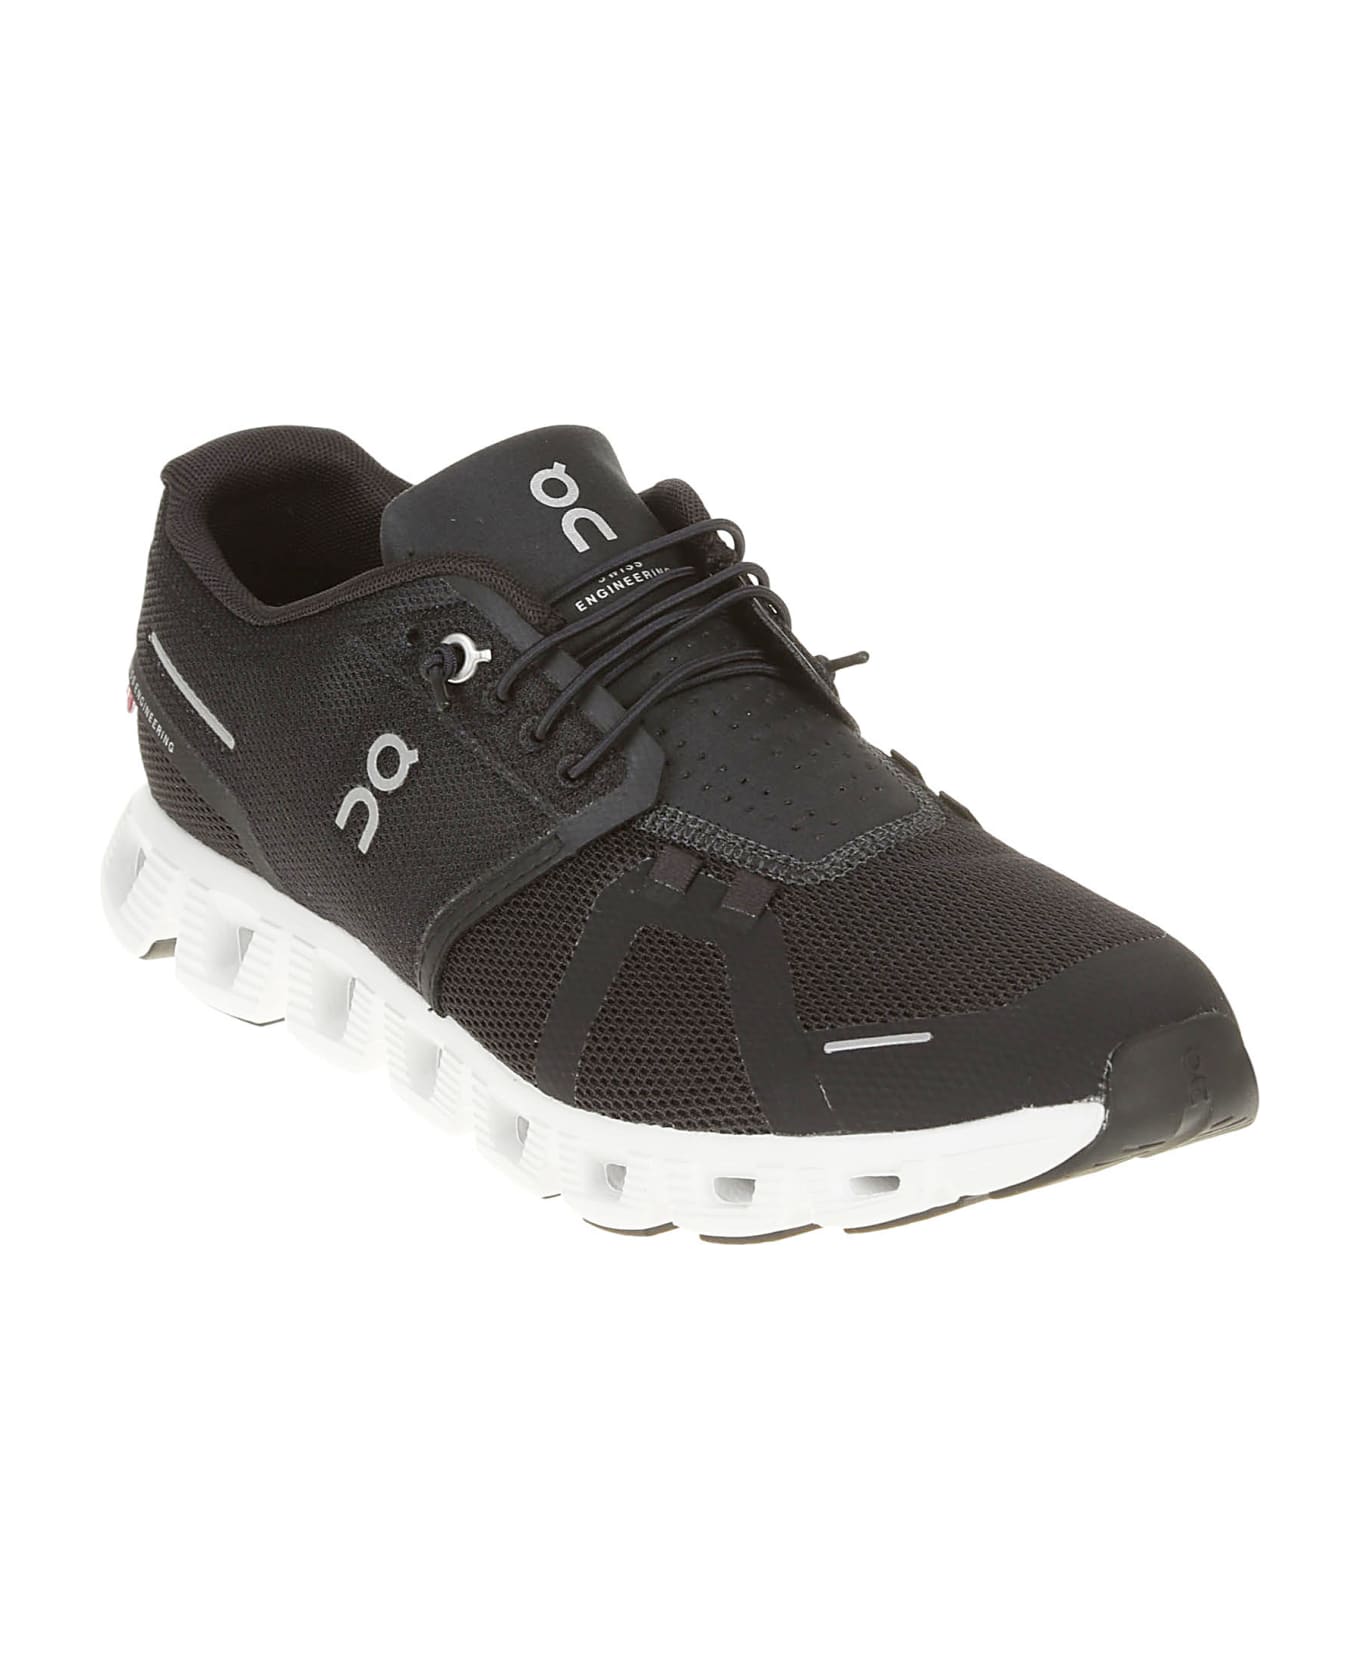 ON Logo Side Classic Sneakers - Black/White